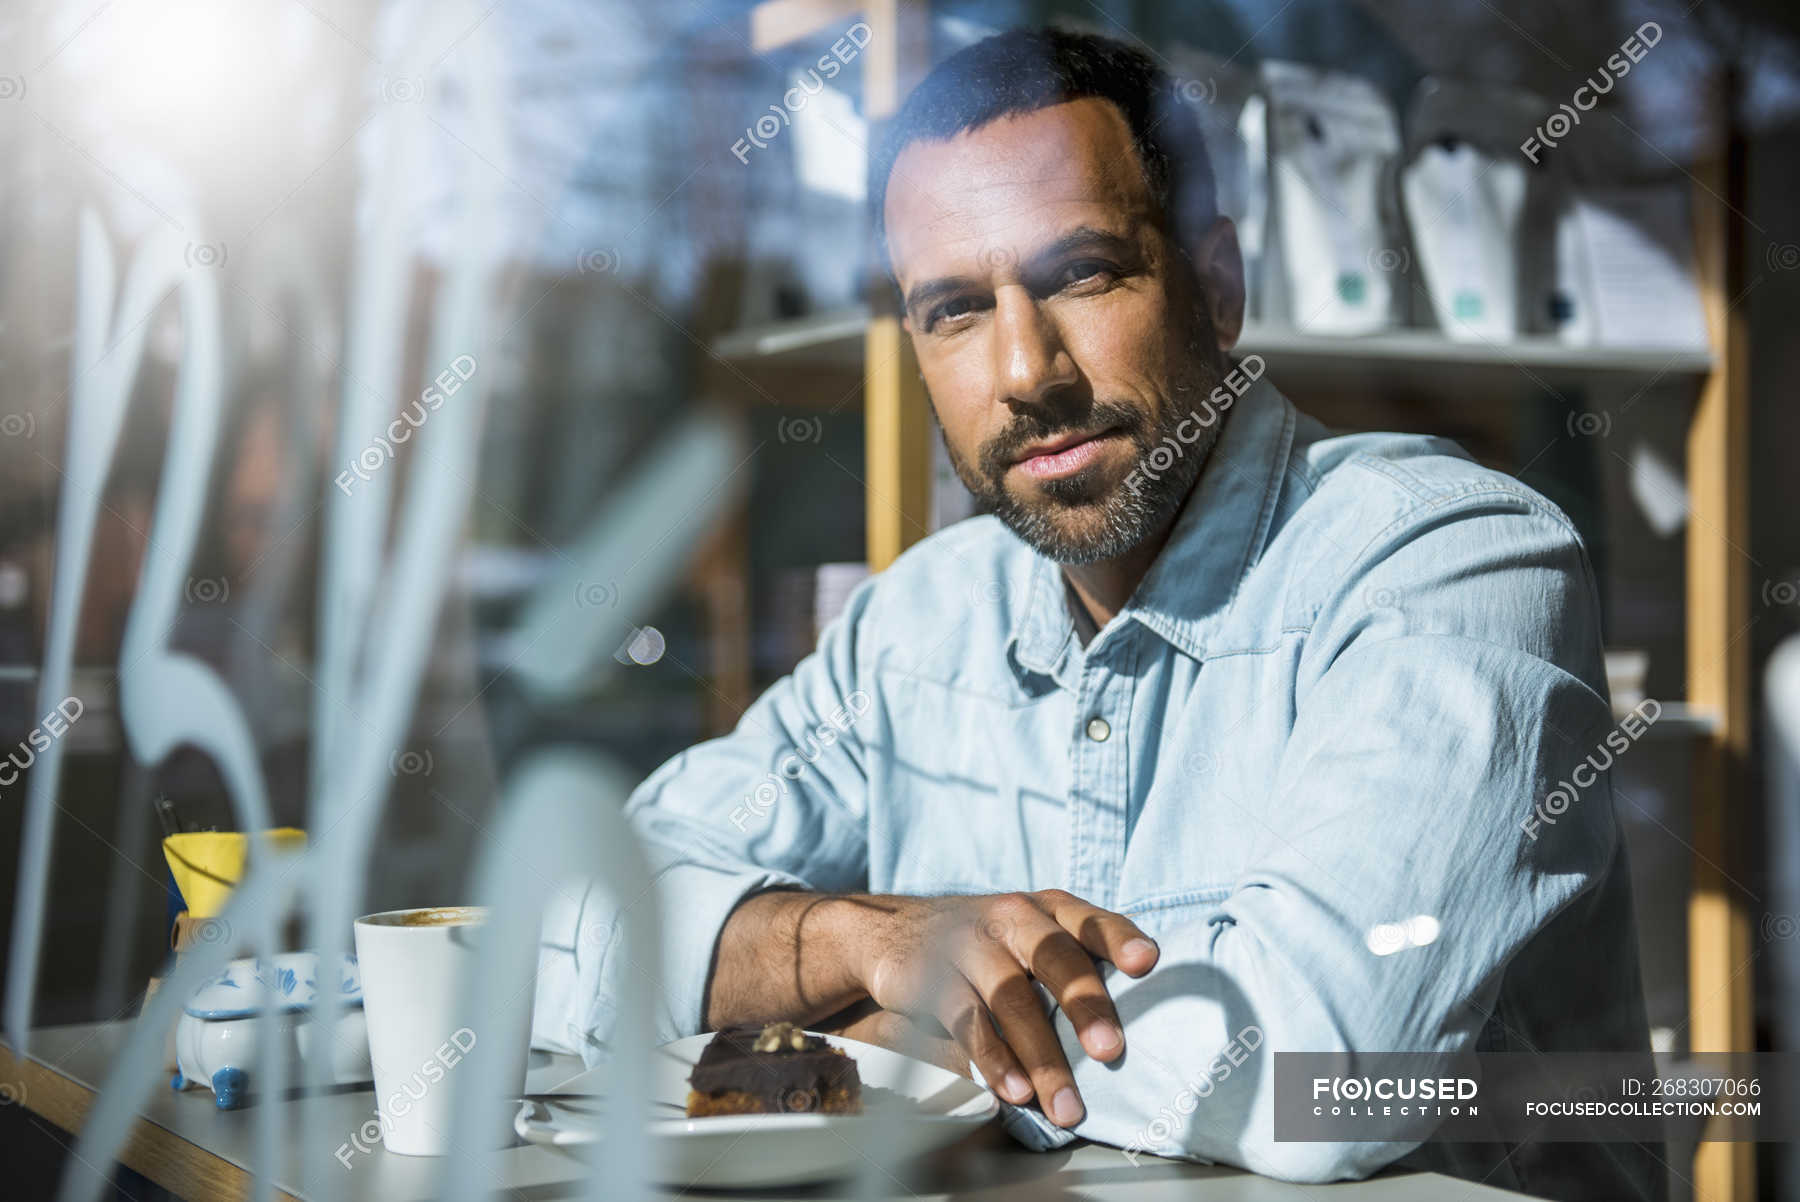 Portrait Of Man With Piece Of Cake In A Cafe Coffee Sitting Stock Photo 268307066